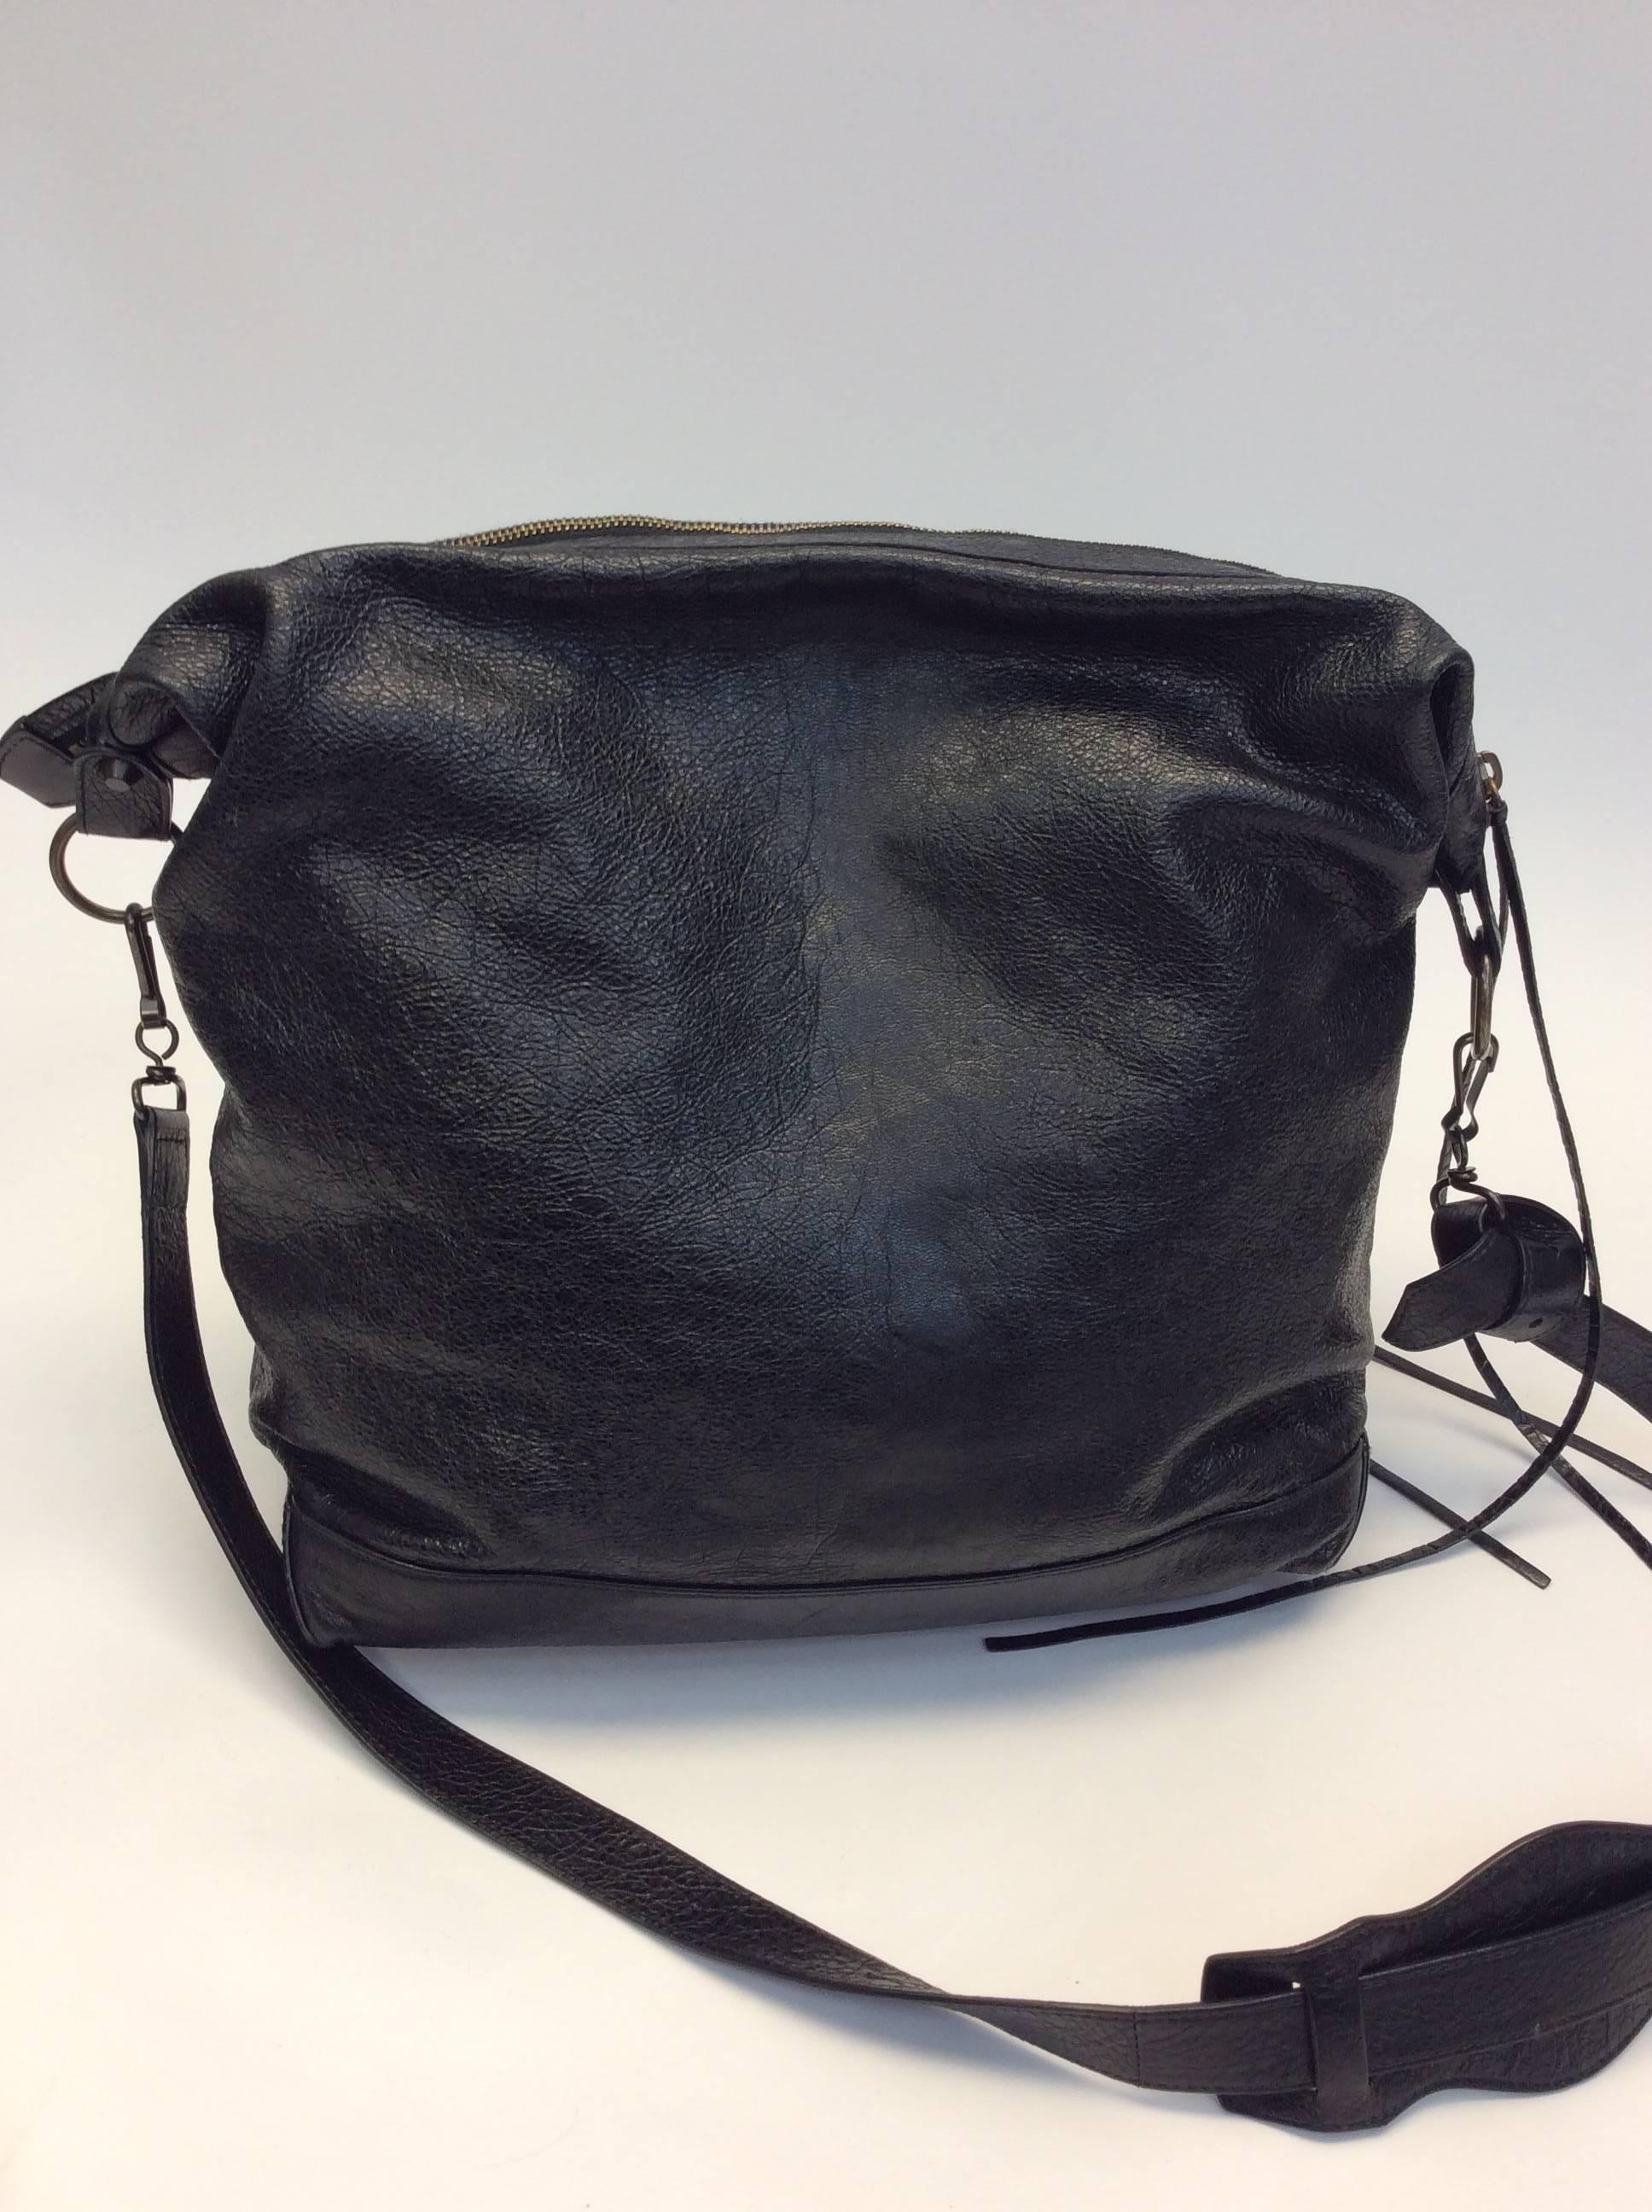 Balenciaga Black Leather Shoulder Bag In Good Condition For Sale In Narberth, PA